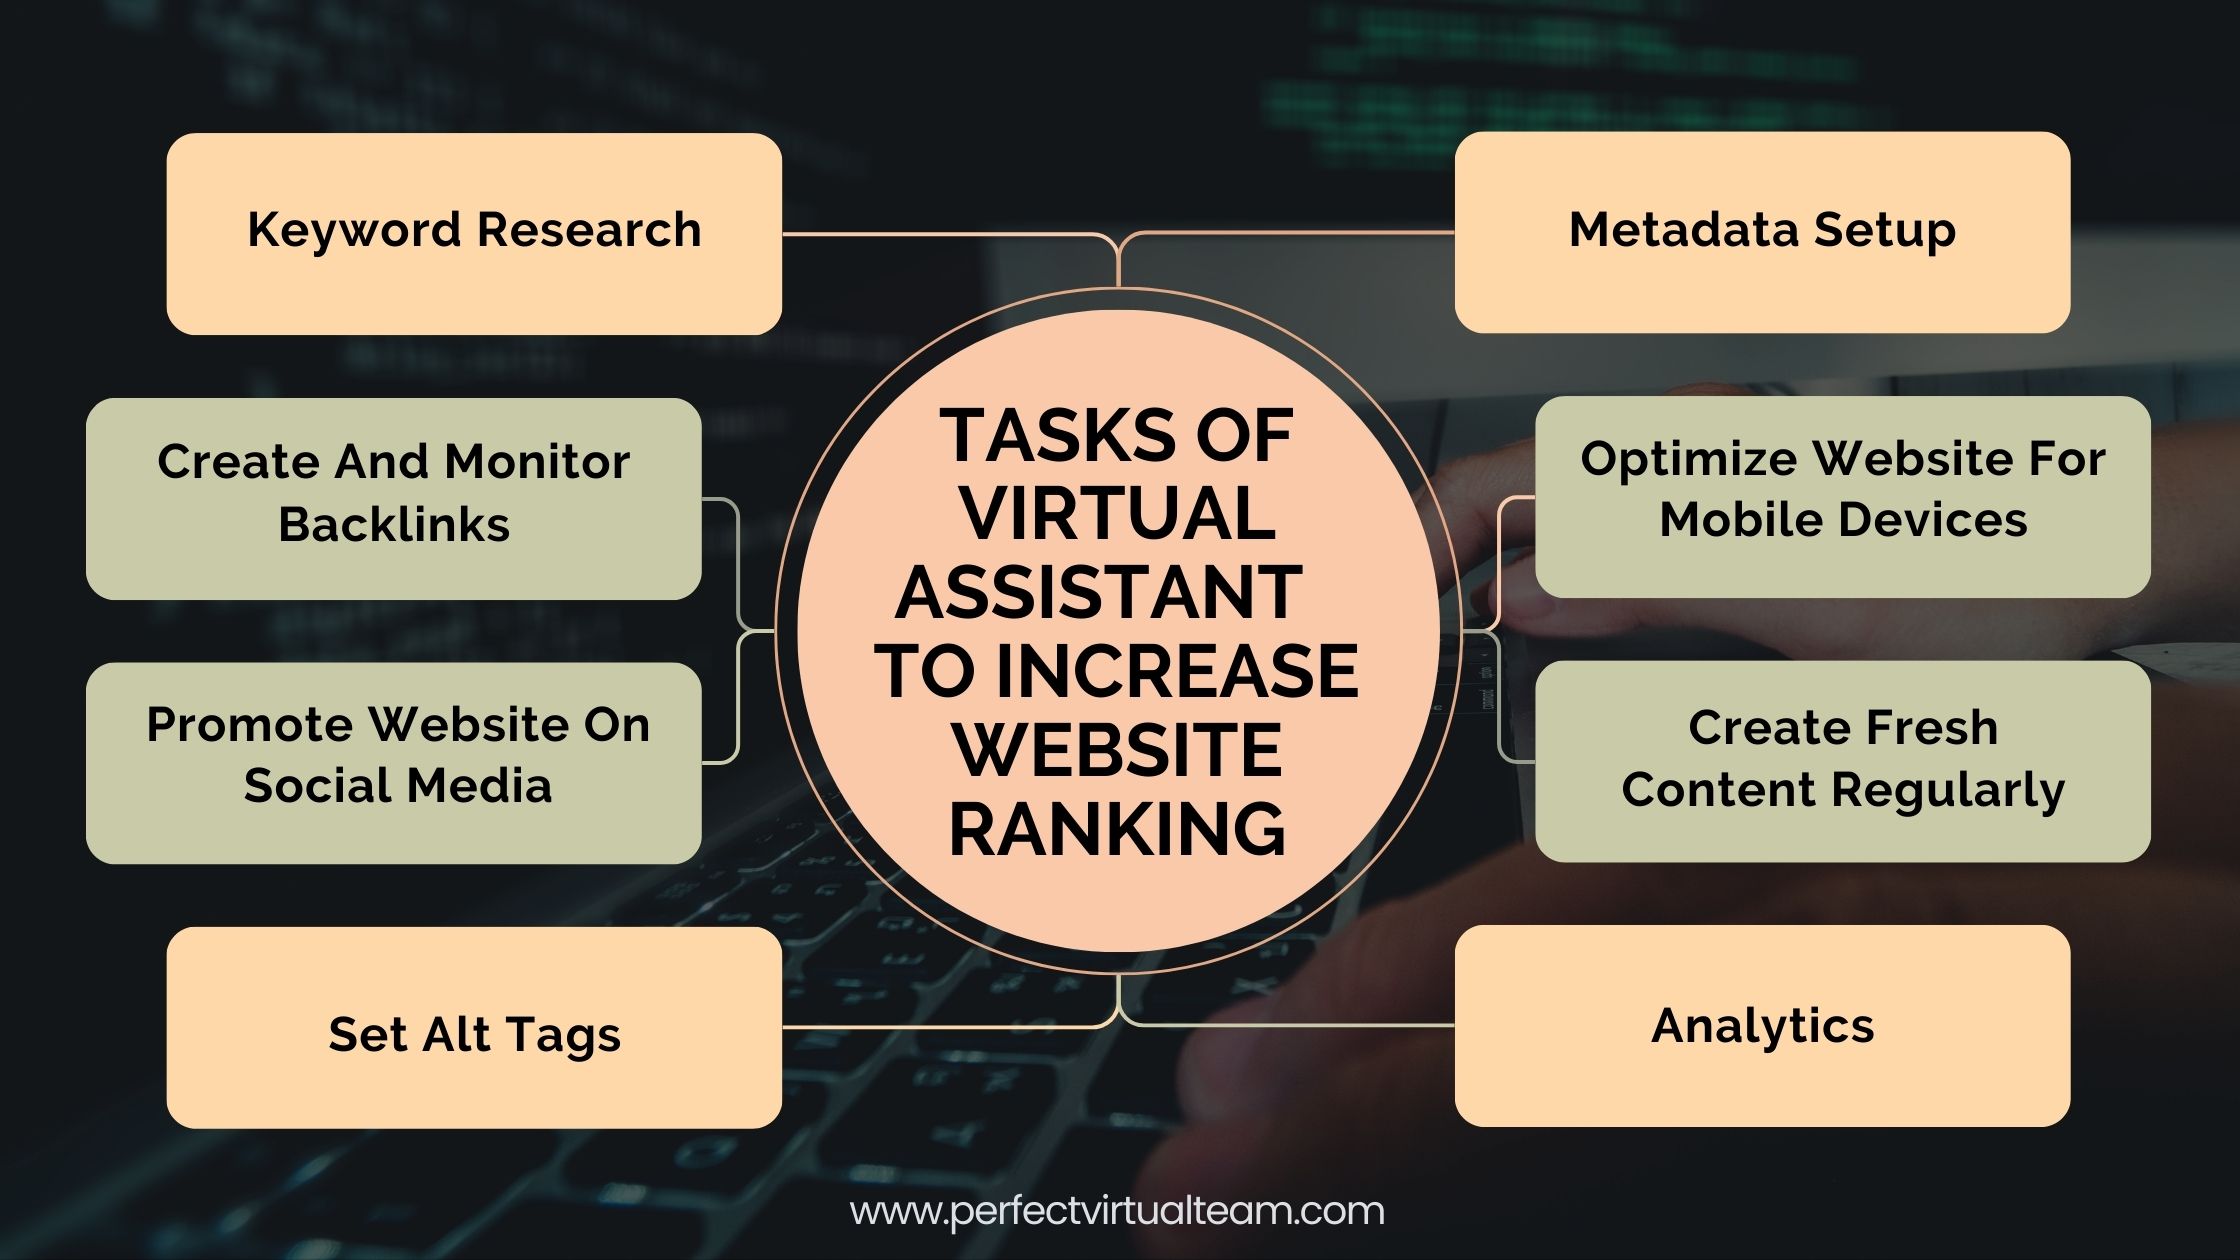 Tasks of Virtual Assistant to Increase Website Ranking